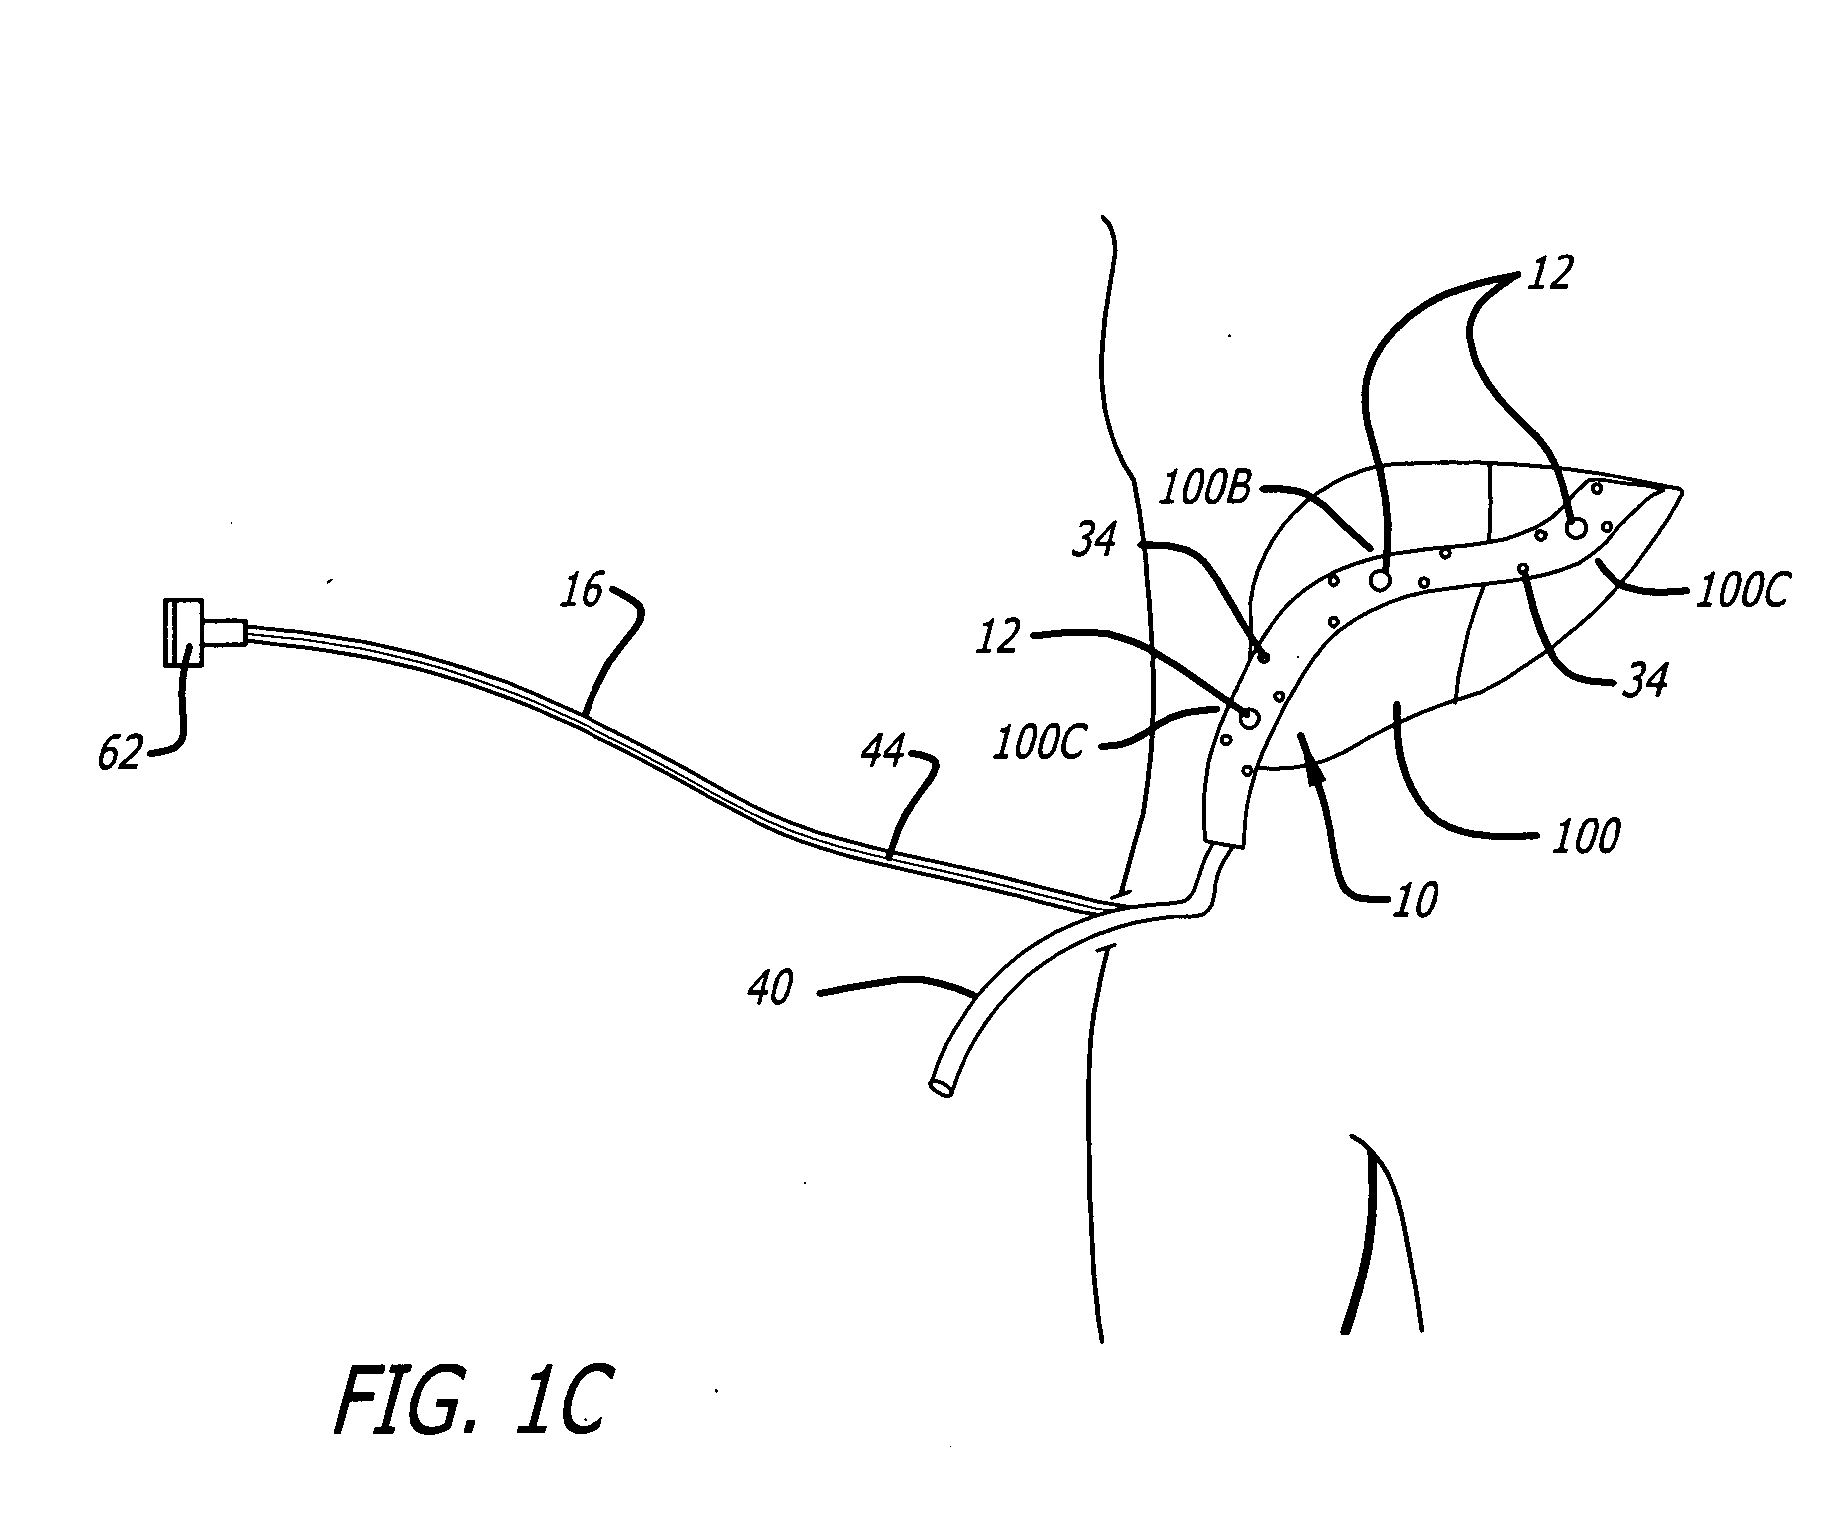 Surgical drain with sensors for monitoring internal tissue condition